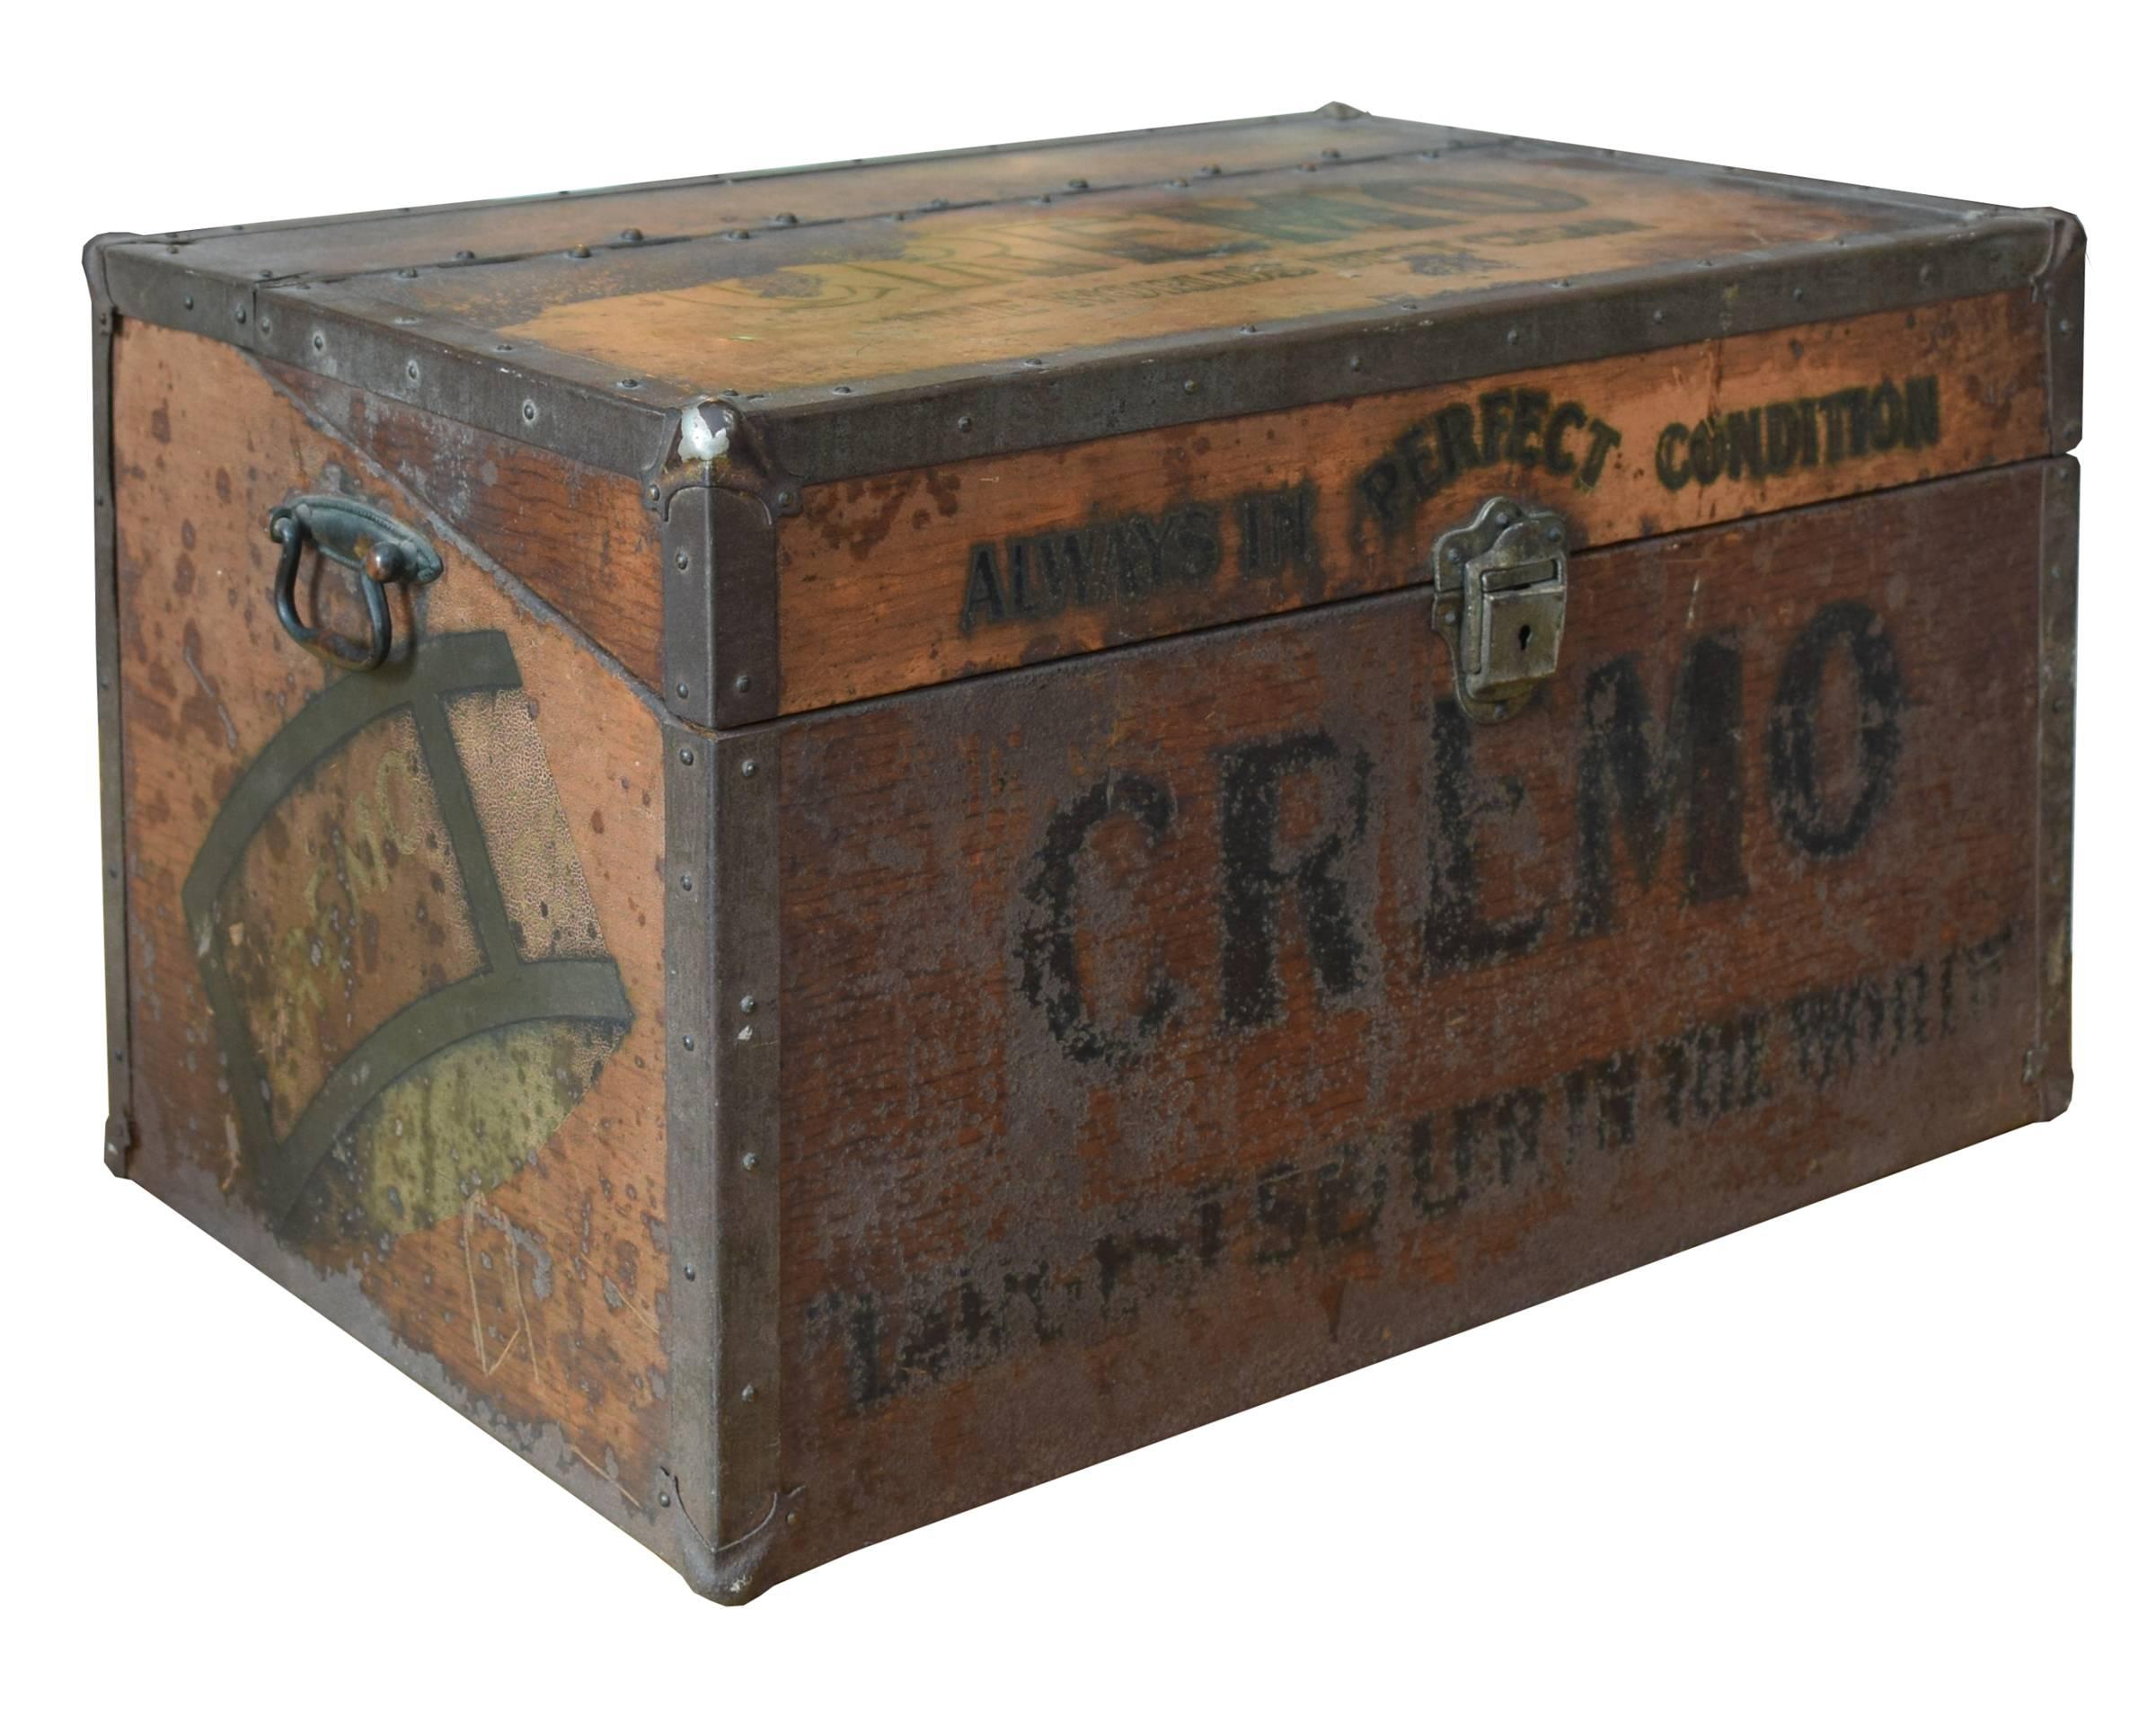 Early 20th century cigar humidor. The top reads 